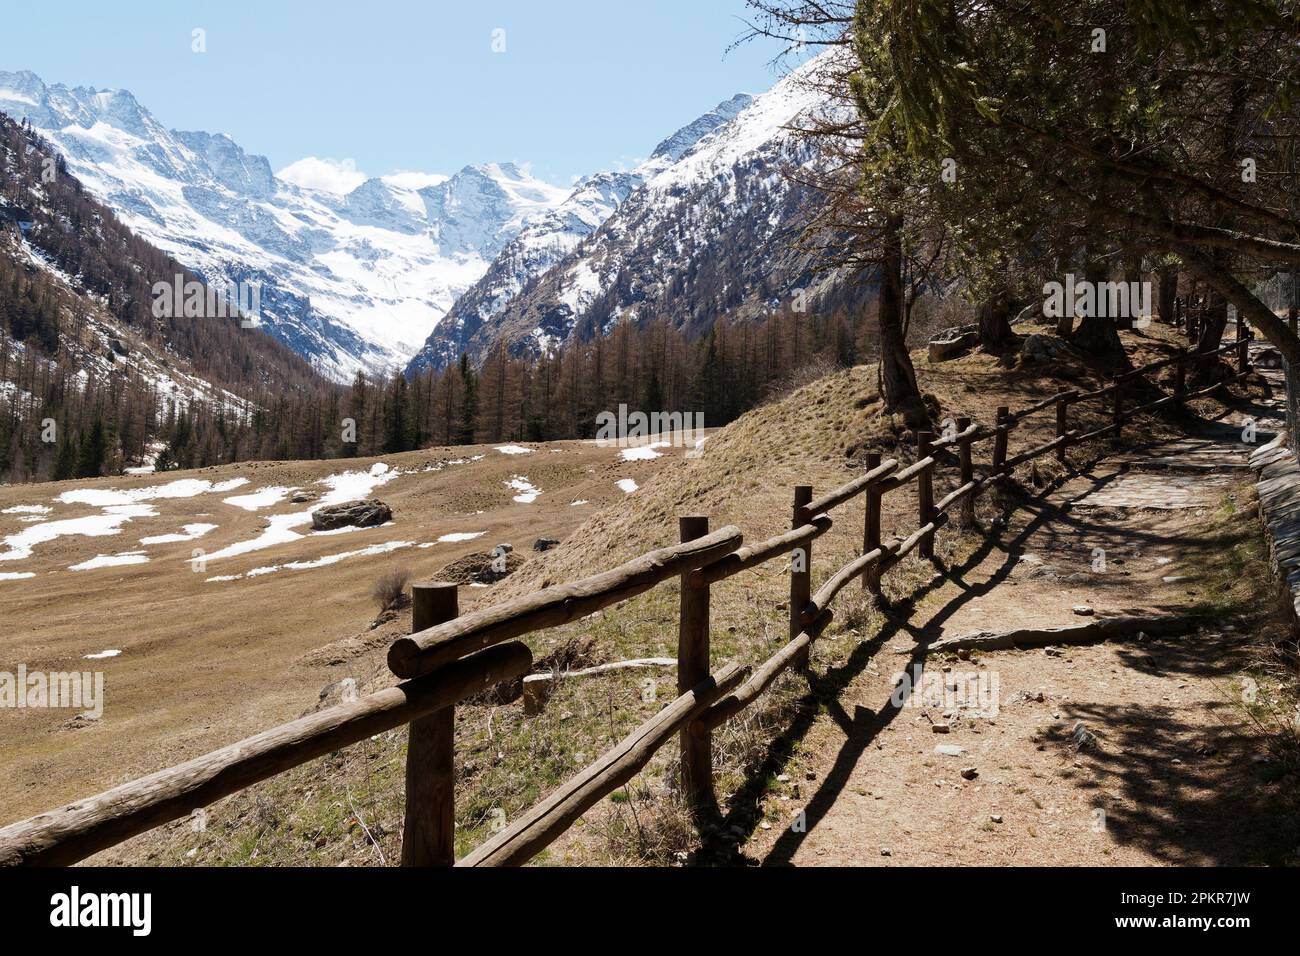 Walking path trail with snow covered mountains behind in Valnontey, Gran Paradiso National Park, Aosta Valley, Italy Stock Photo